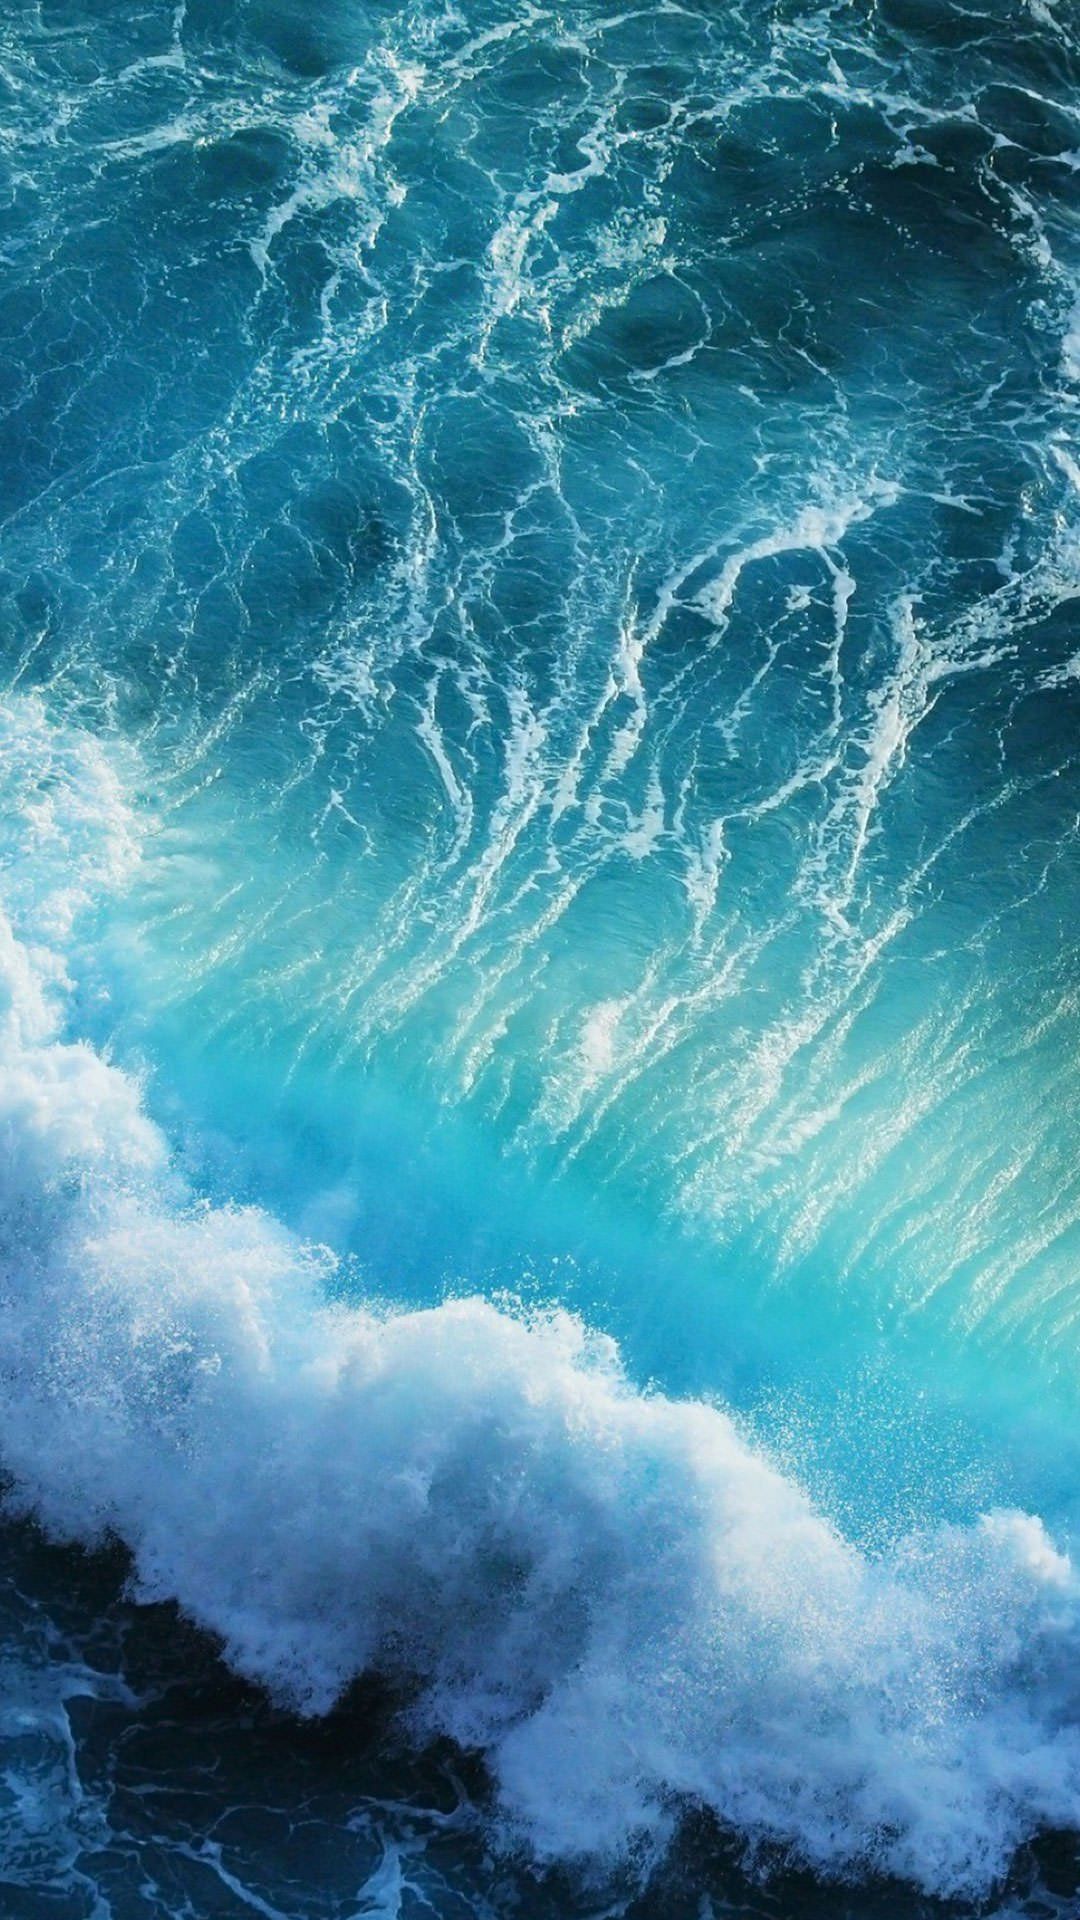 Blue Waves iPhone X Wallpaper. HD Wallpaper, HD Background, Tumblr Background, Image, Picture